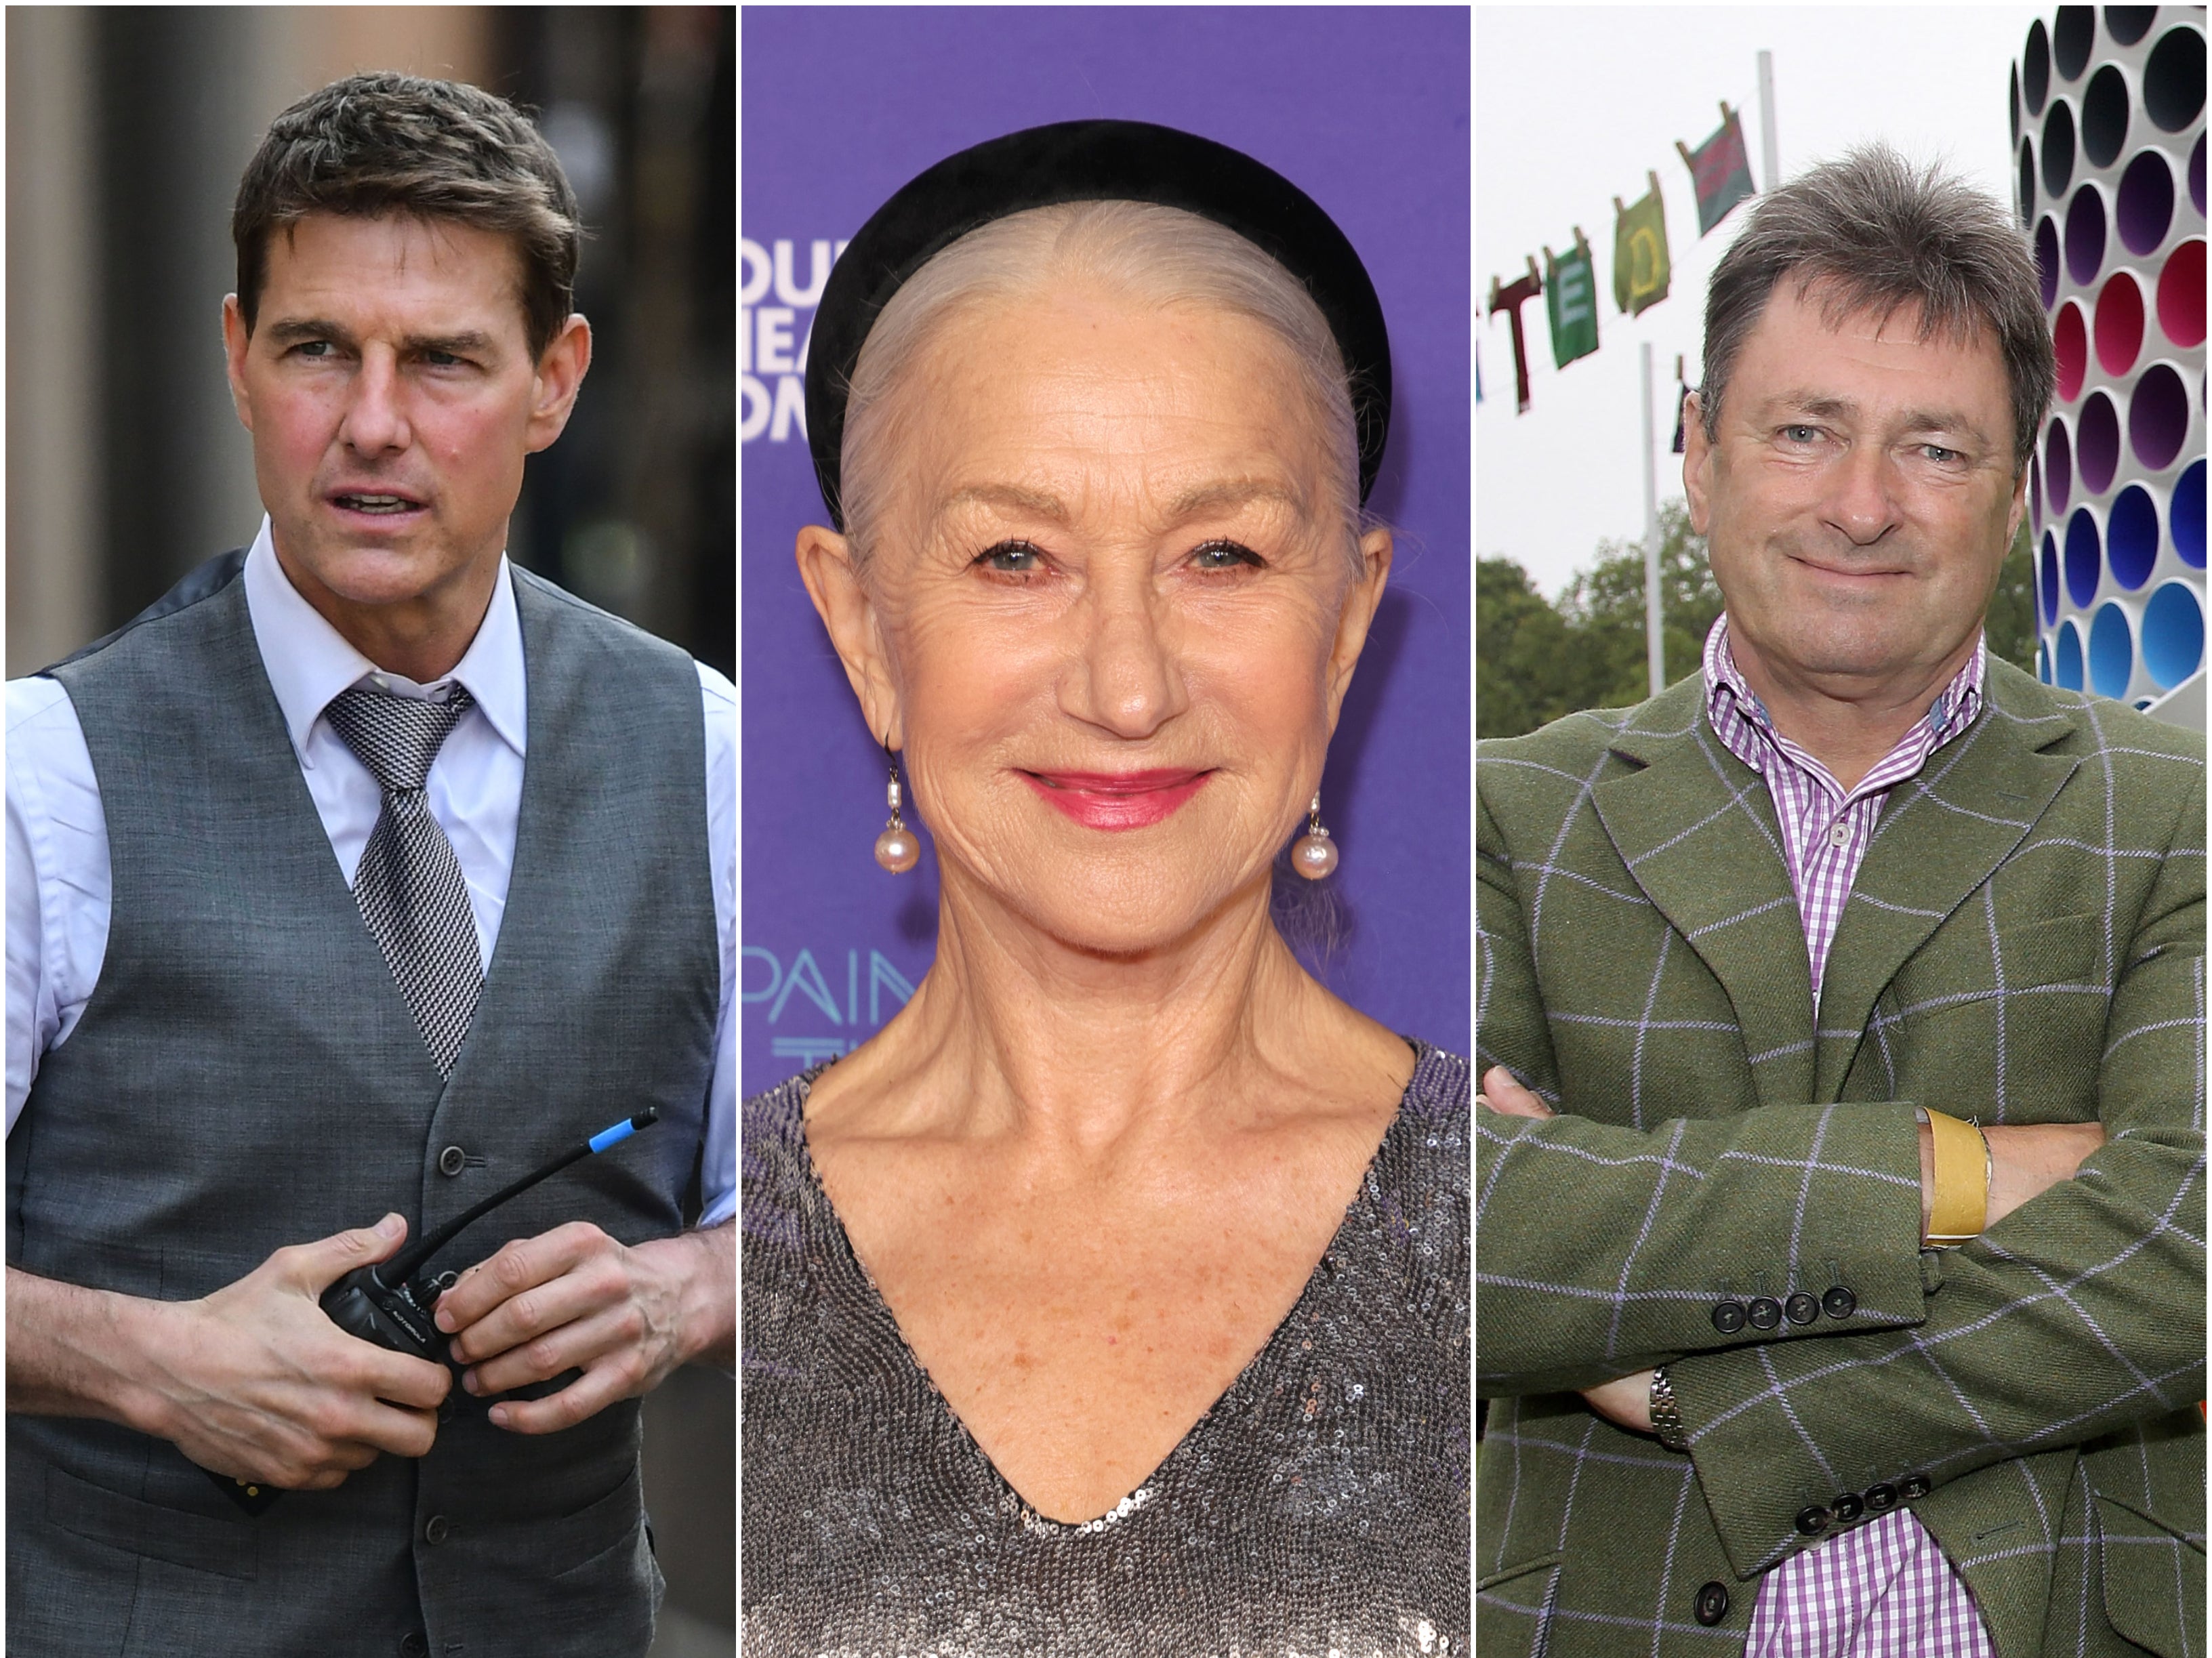 Tom Cruise, Dame Helen Mirren and Alan Titchmarsh are part of an all-star cast leading celebrations